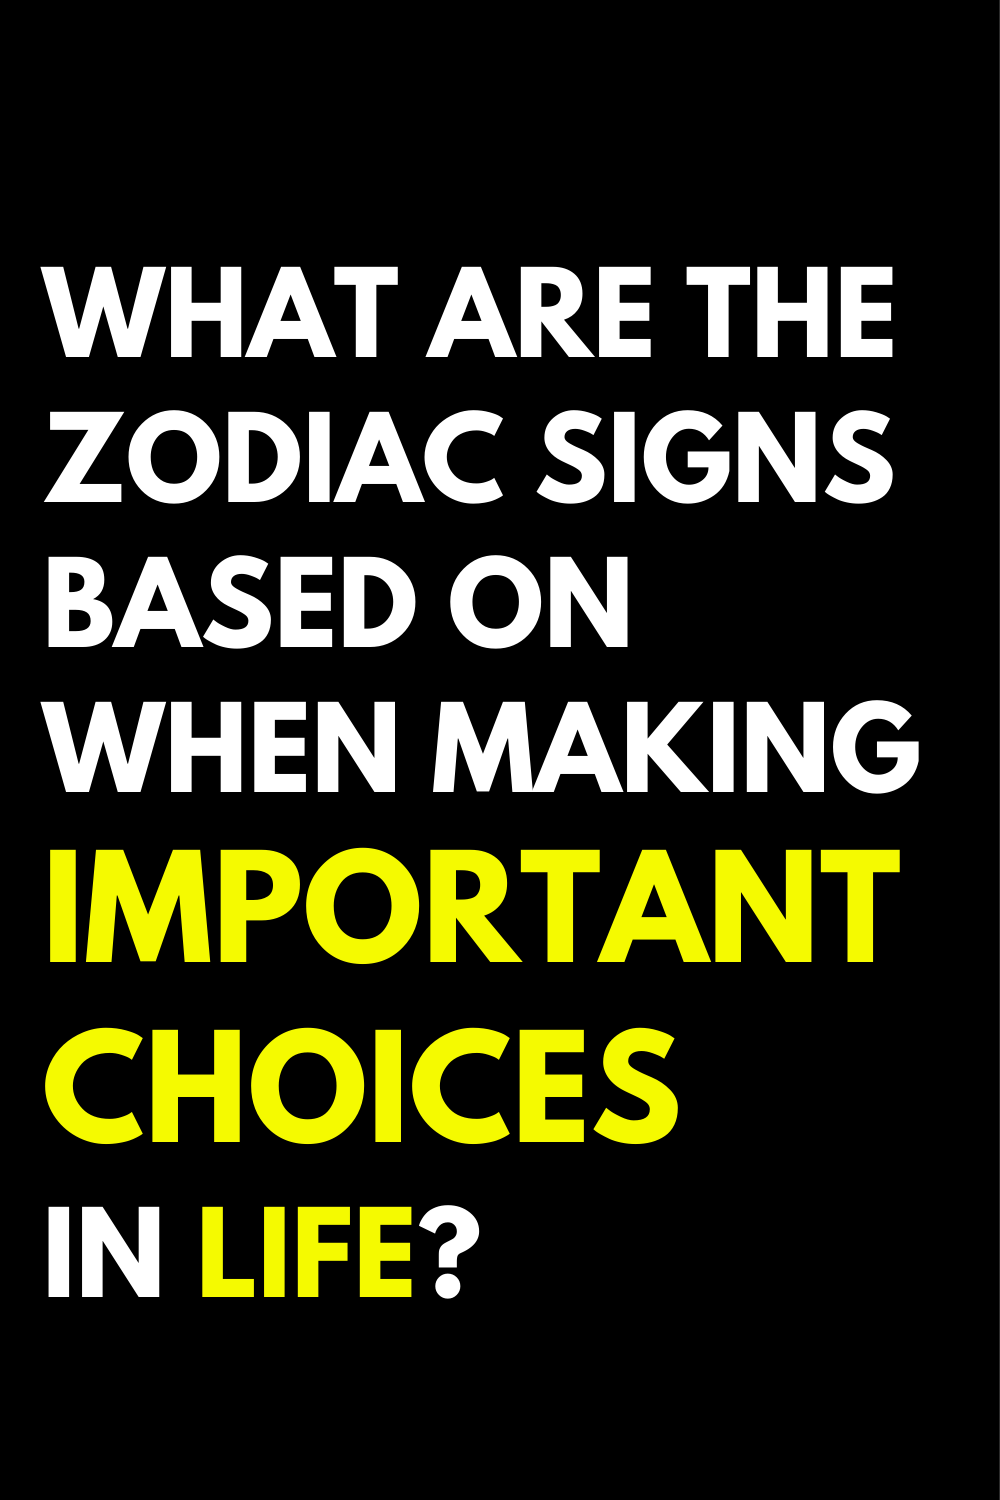 What are the zodiac signs based on when making important choices in life?